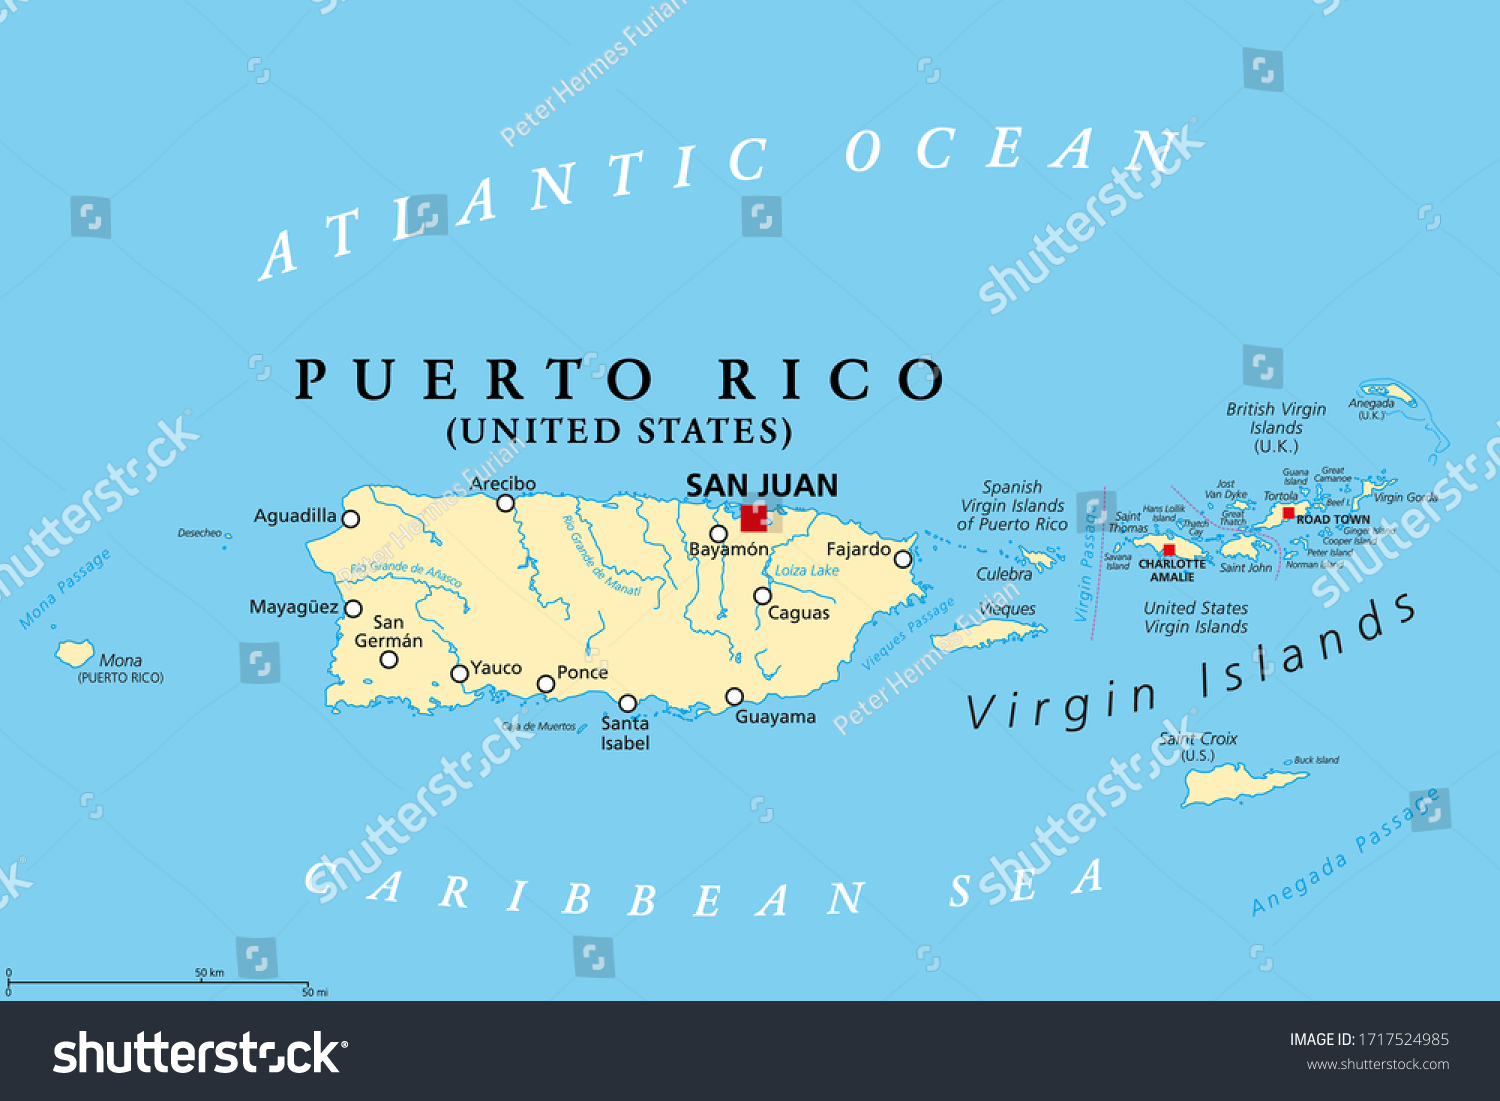 Stock Vector Puerto Rico And Virgin Islands Political Map British Spanish And United States Virgin Islands 1717524985 